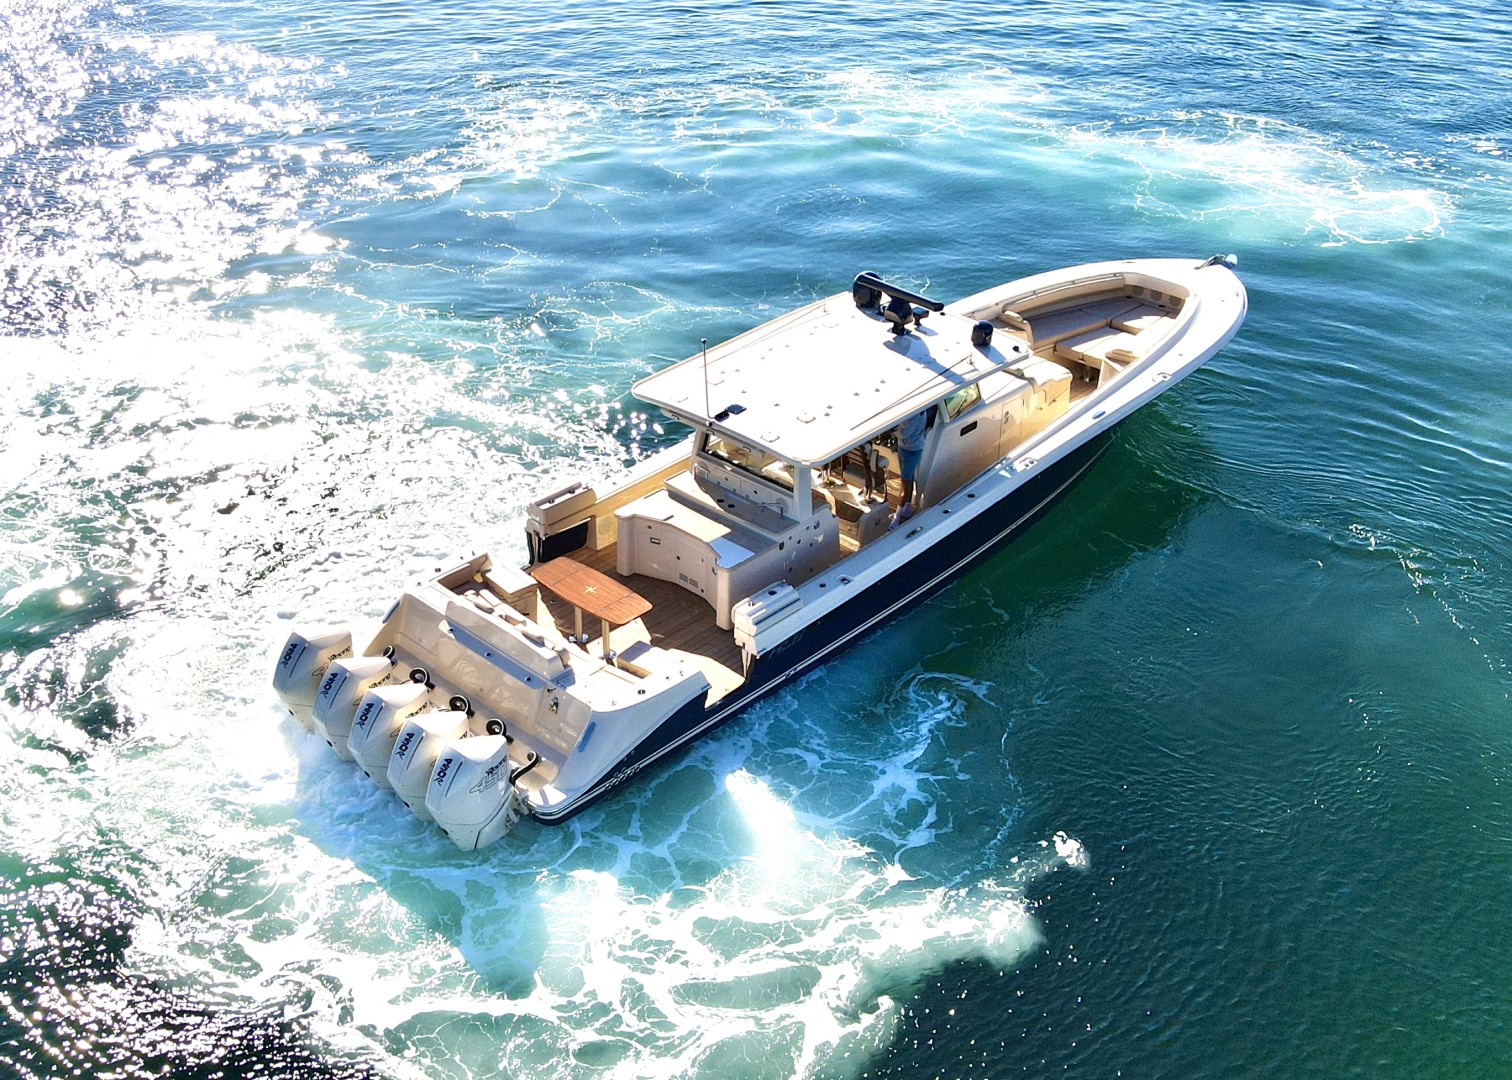 Spencer Ship Monaco distributes the Largest Central Console Yachts in the World